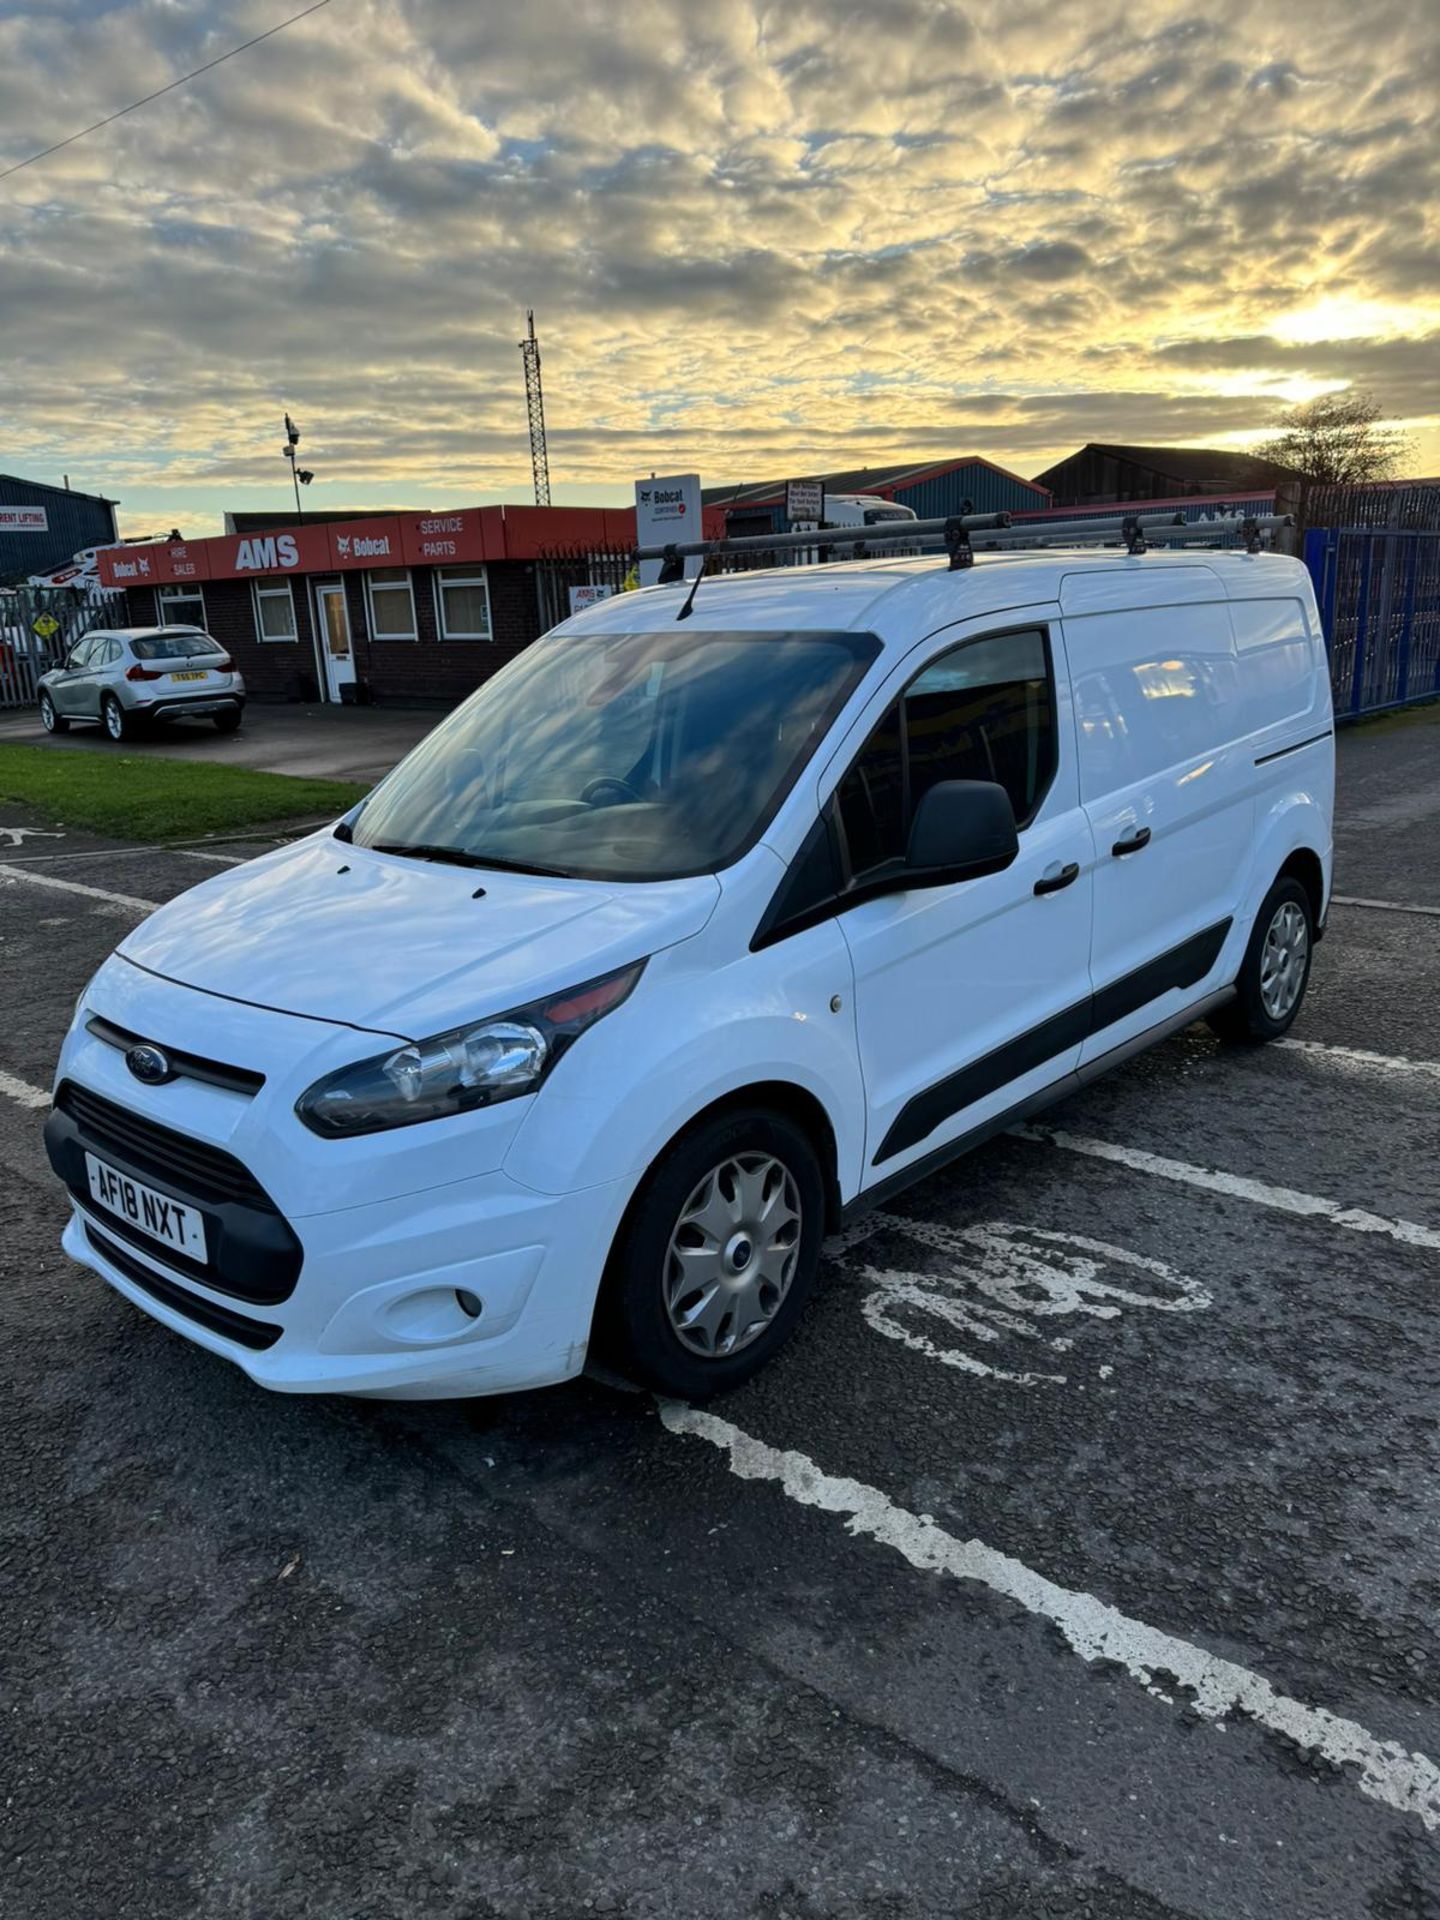 2018 18 FORD TRANSIT CONNECT TREND PAENL VAN - 128K MILES - EURO 6 - 3 SEATS - LWB - ROOF RACK. - Image 6 of 11